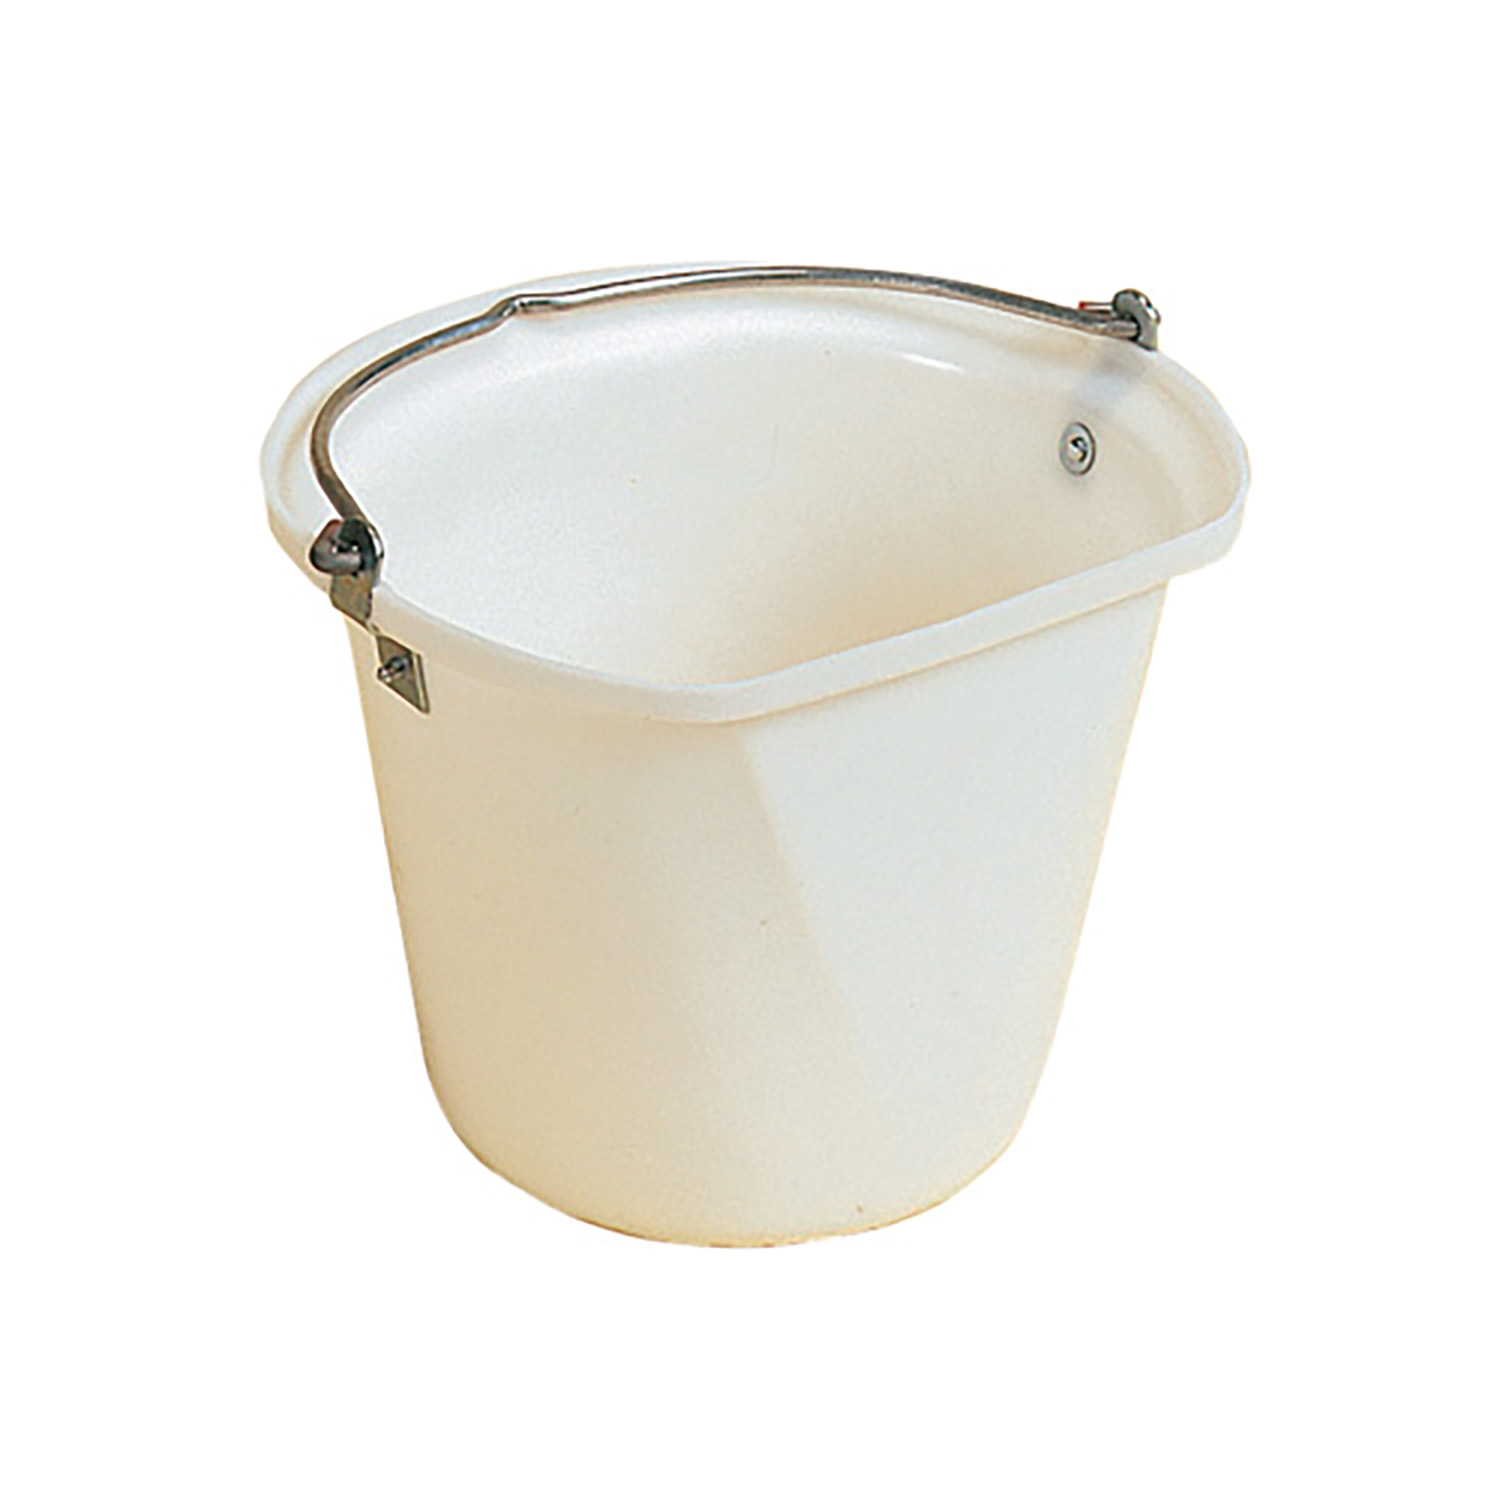 STUBBS HANGING BUCKET FLAT SIDED SMALL 14 LT S85  WHITE 14 LT